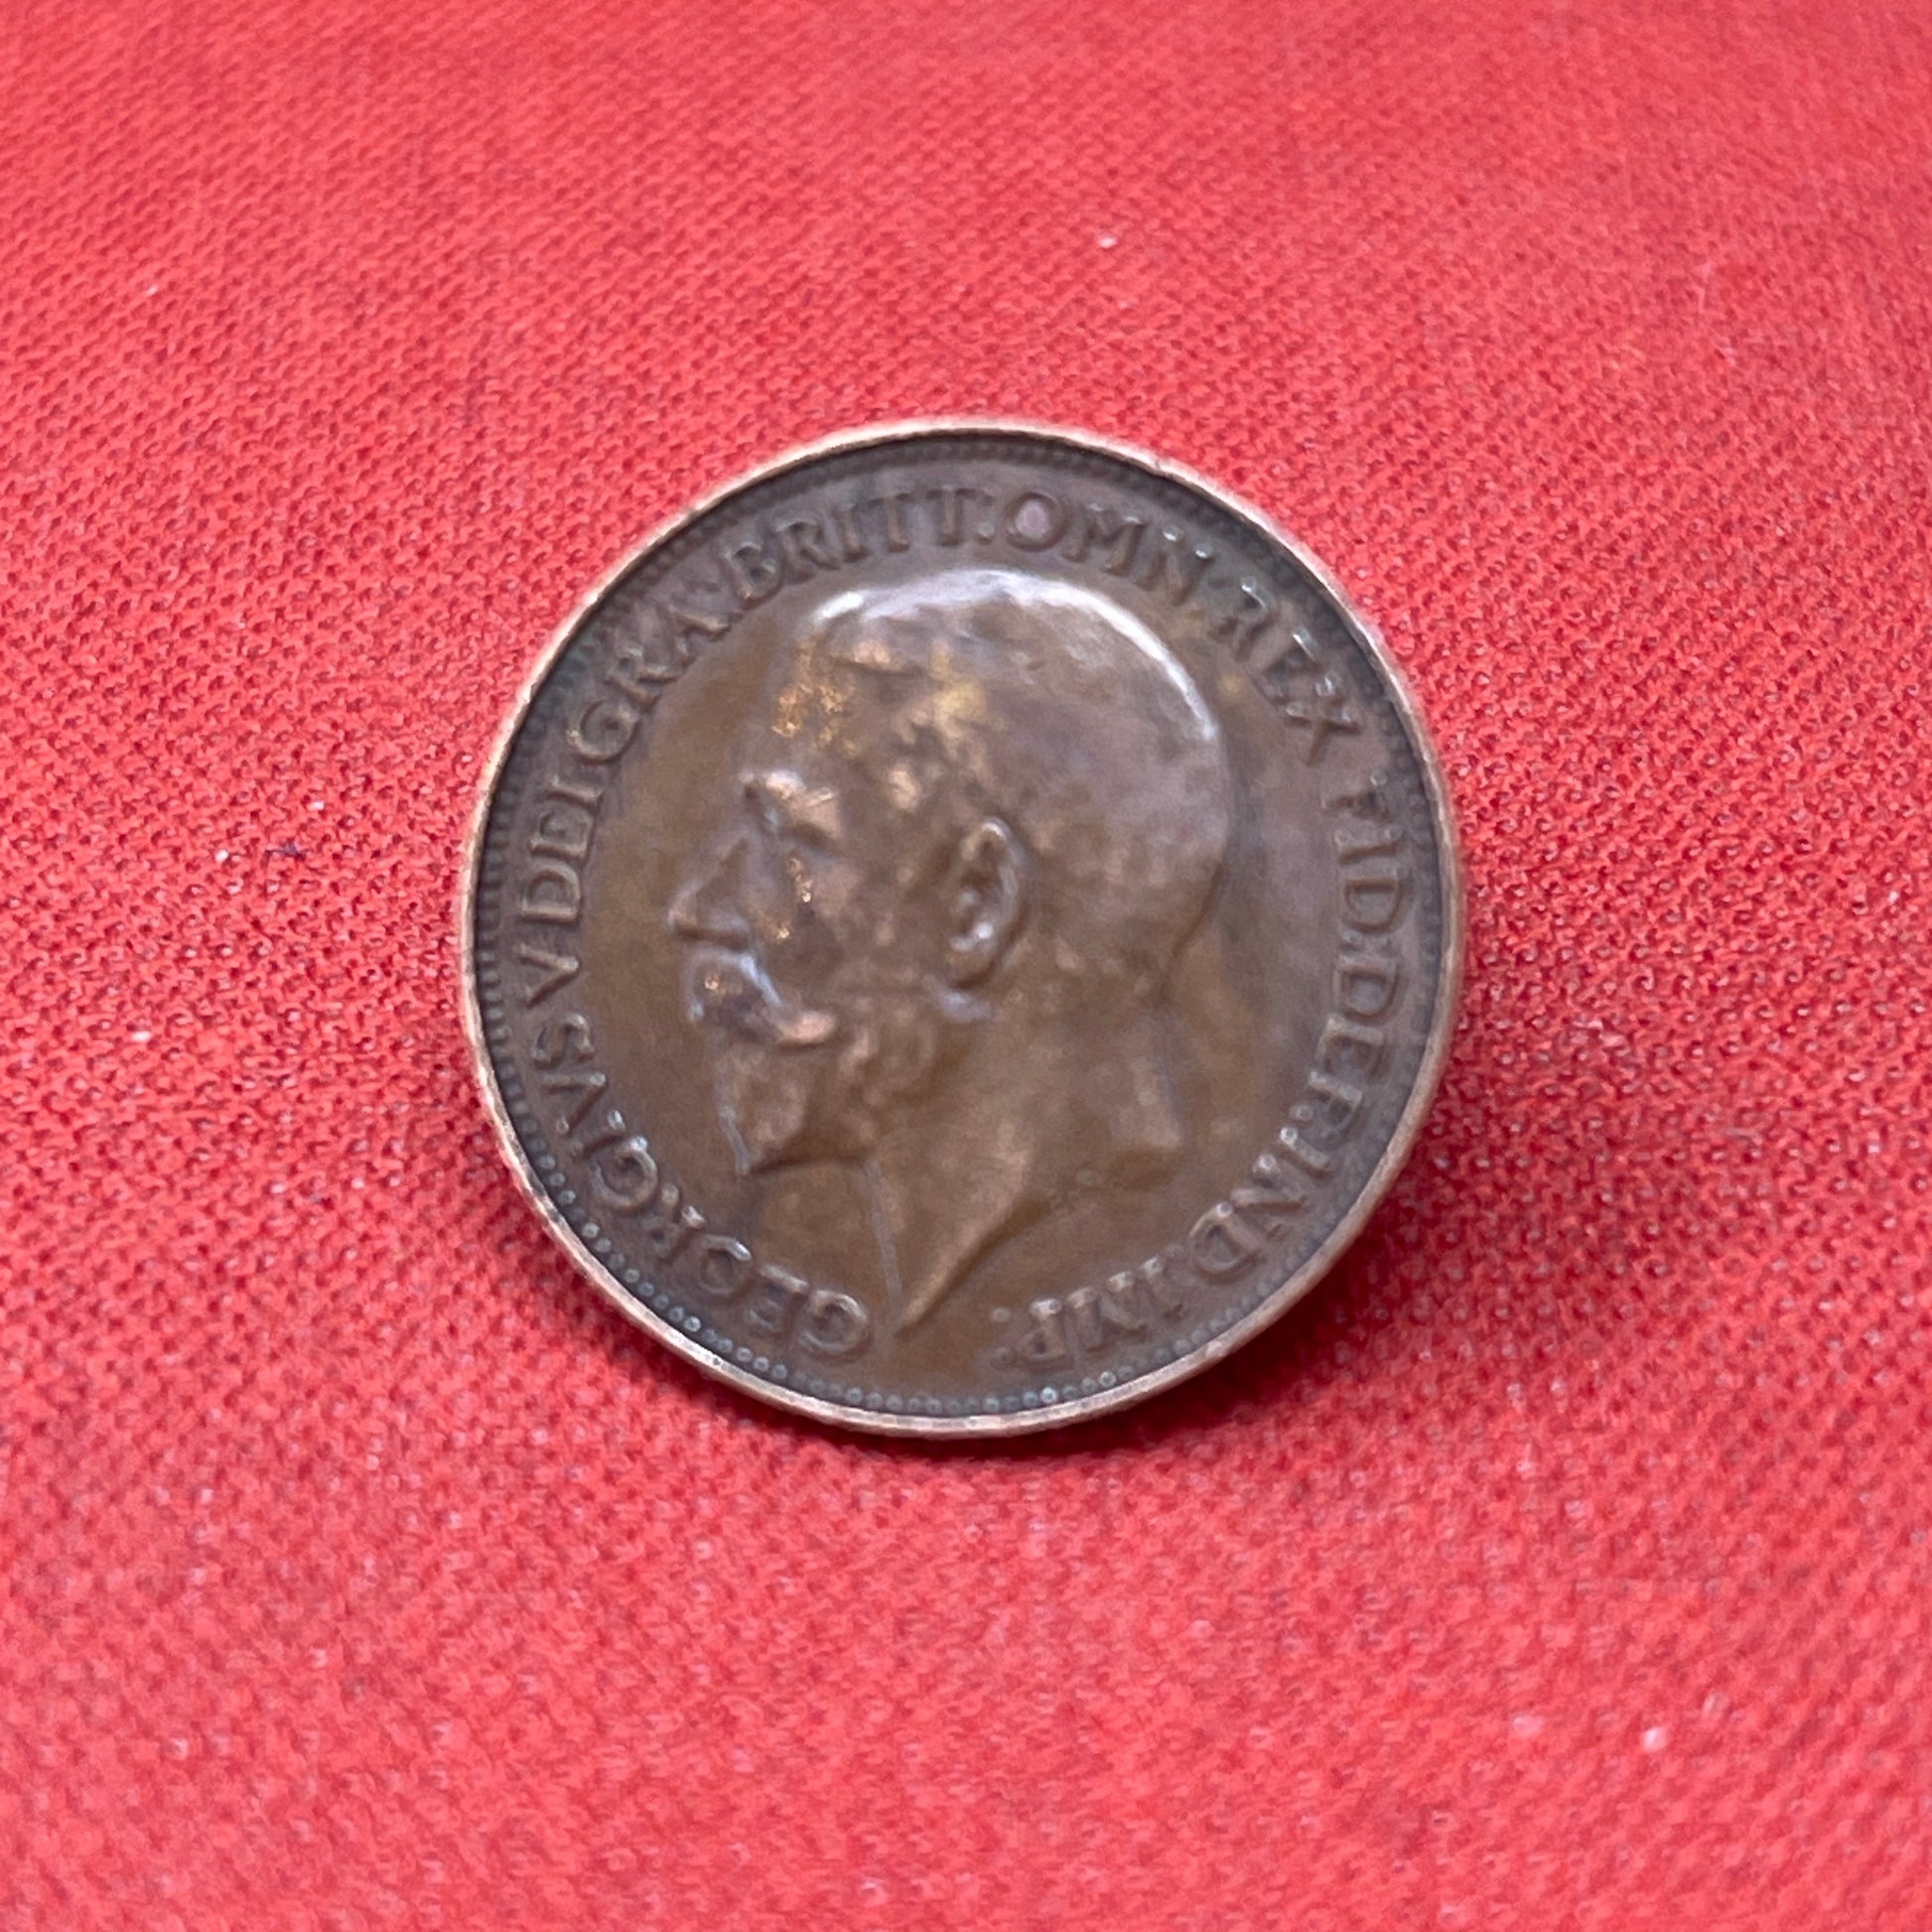 Discover the King George V Farthing, minted from 1911 to 1936. Featuring the iconic Britannia design and King George V's portrait, these historic bronze coins are perfect for collectors and history enthusiasts.